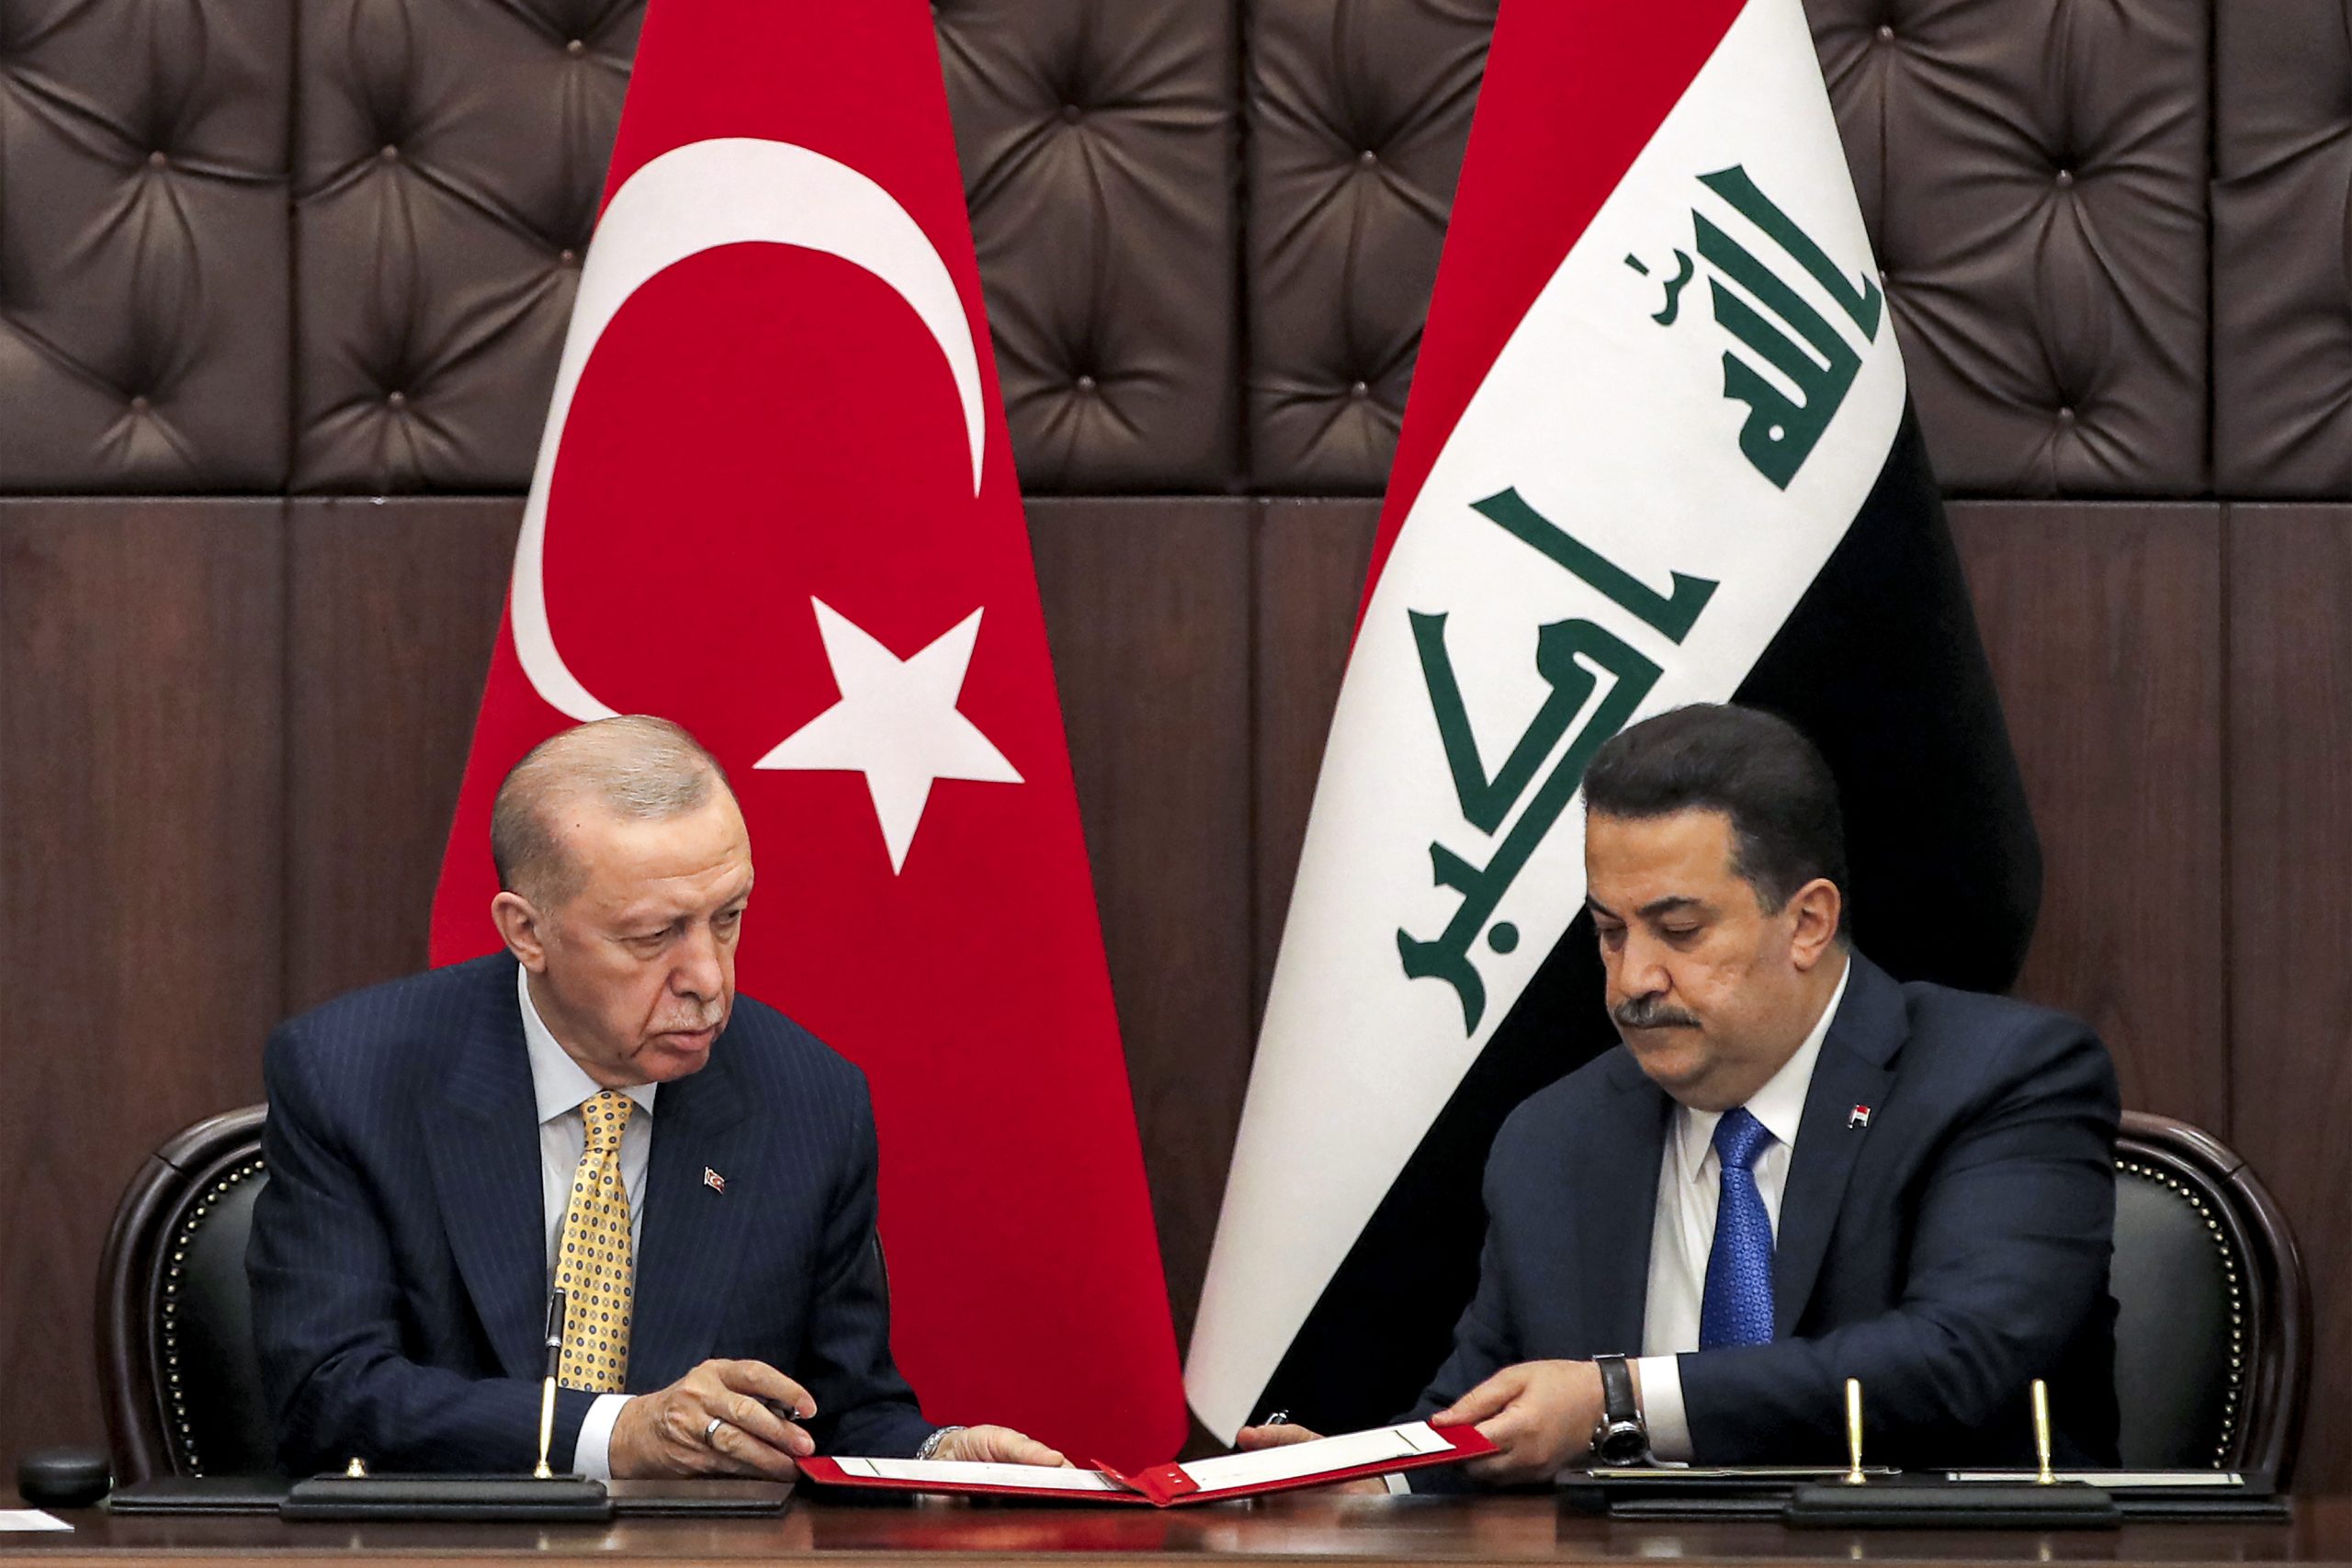 IntelBrief: Erdogan Visits Iraq to Discuss Security, Trade, Water, and Energy Issues